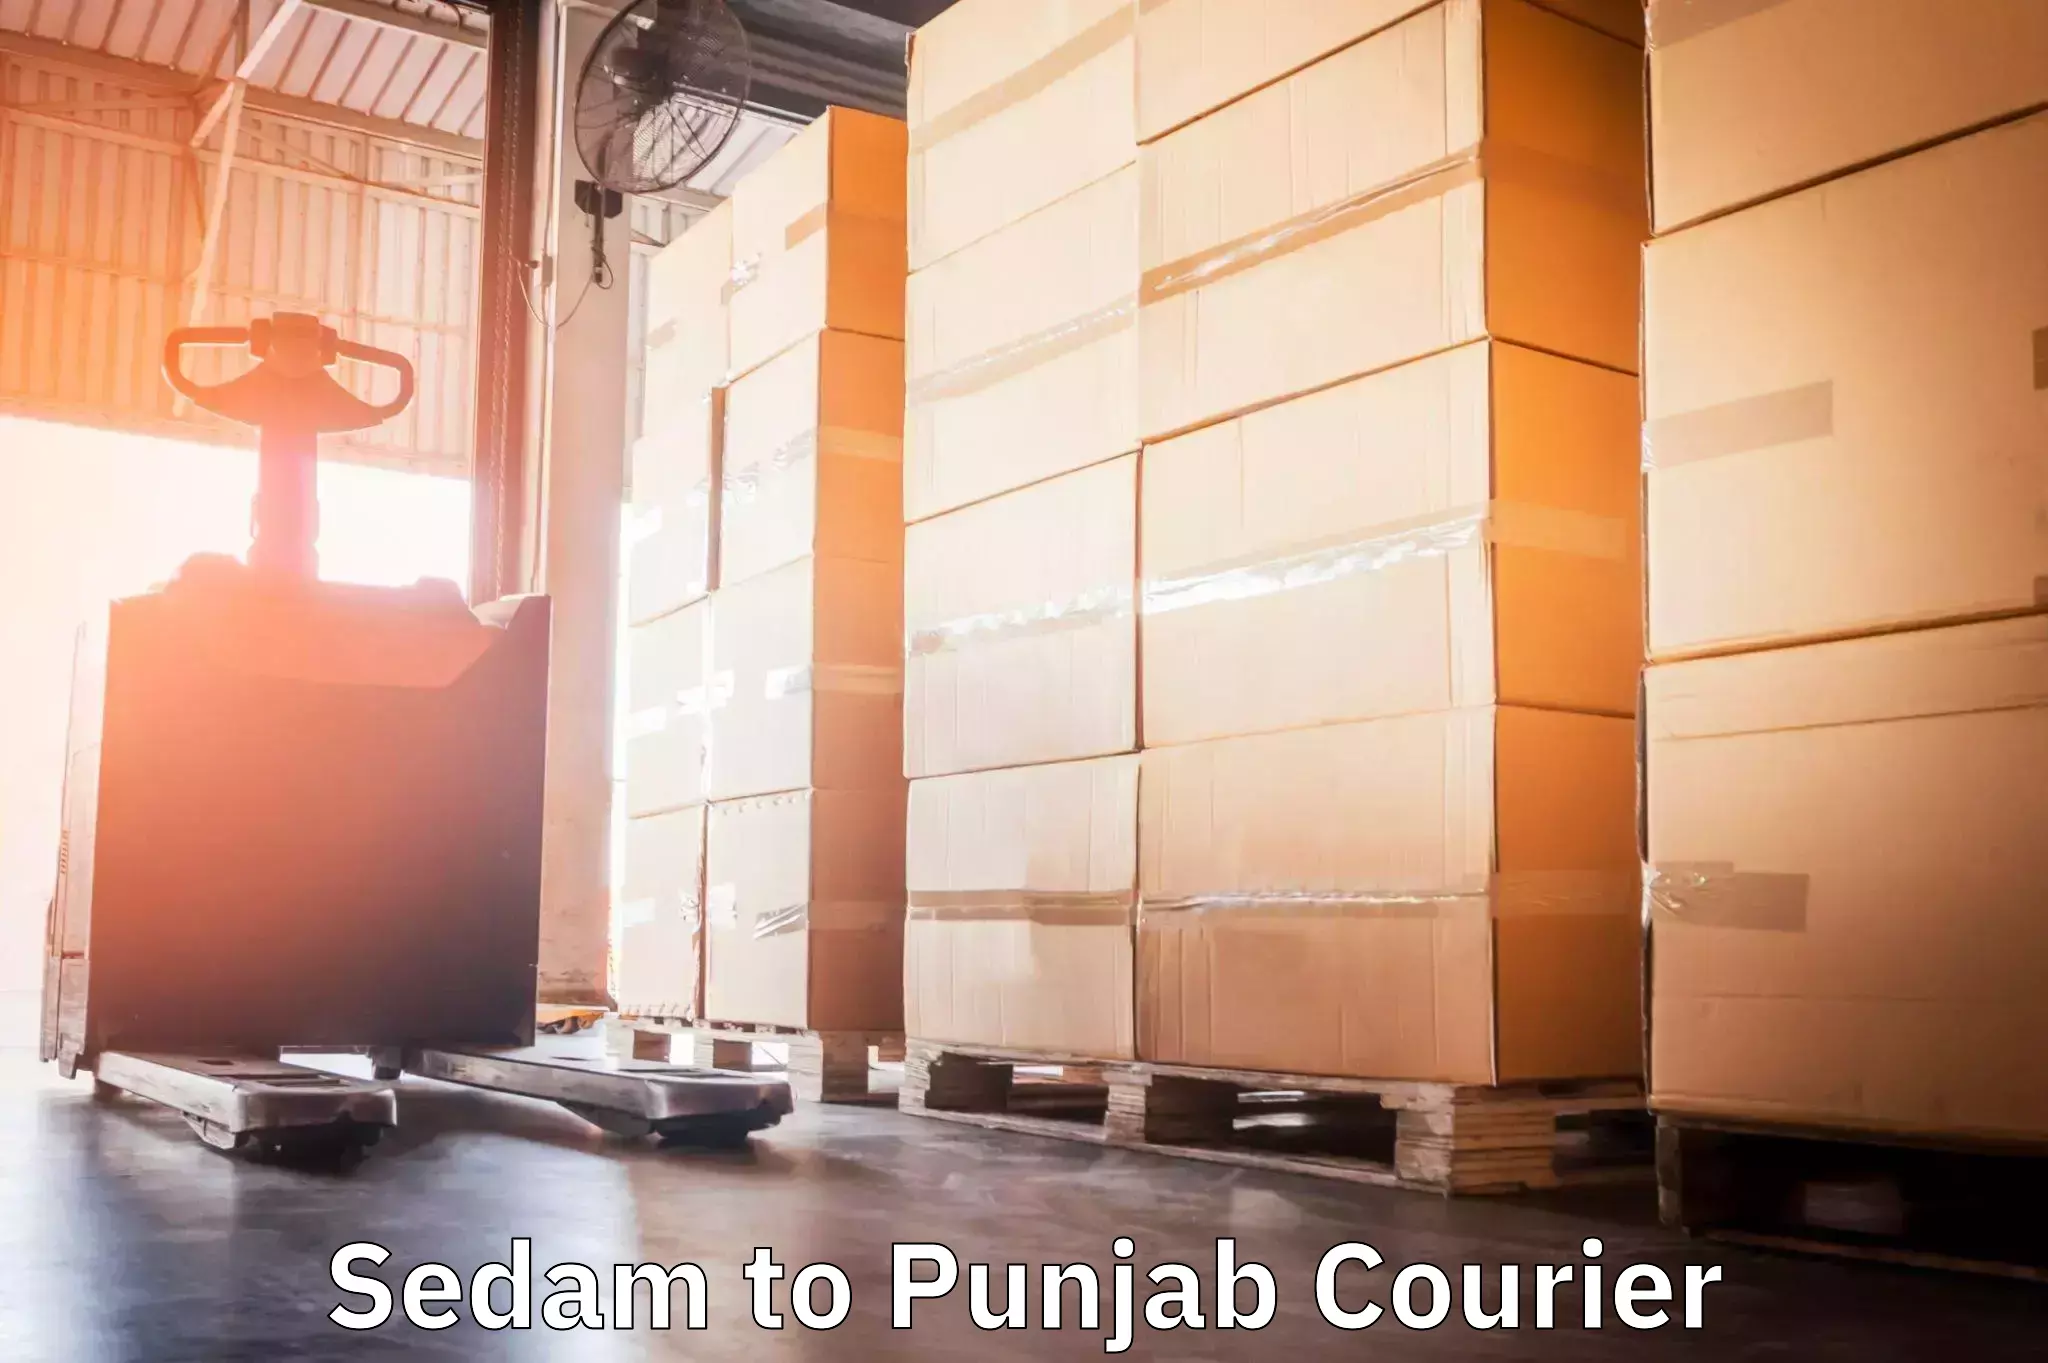 Courier service booking in Sedam to Jalalabad